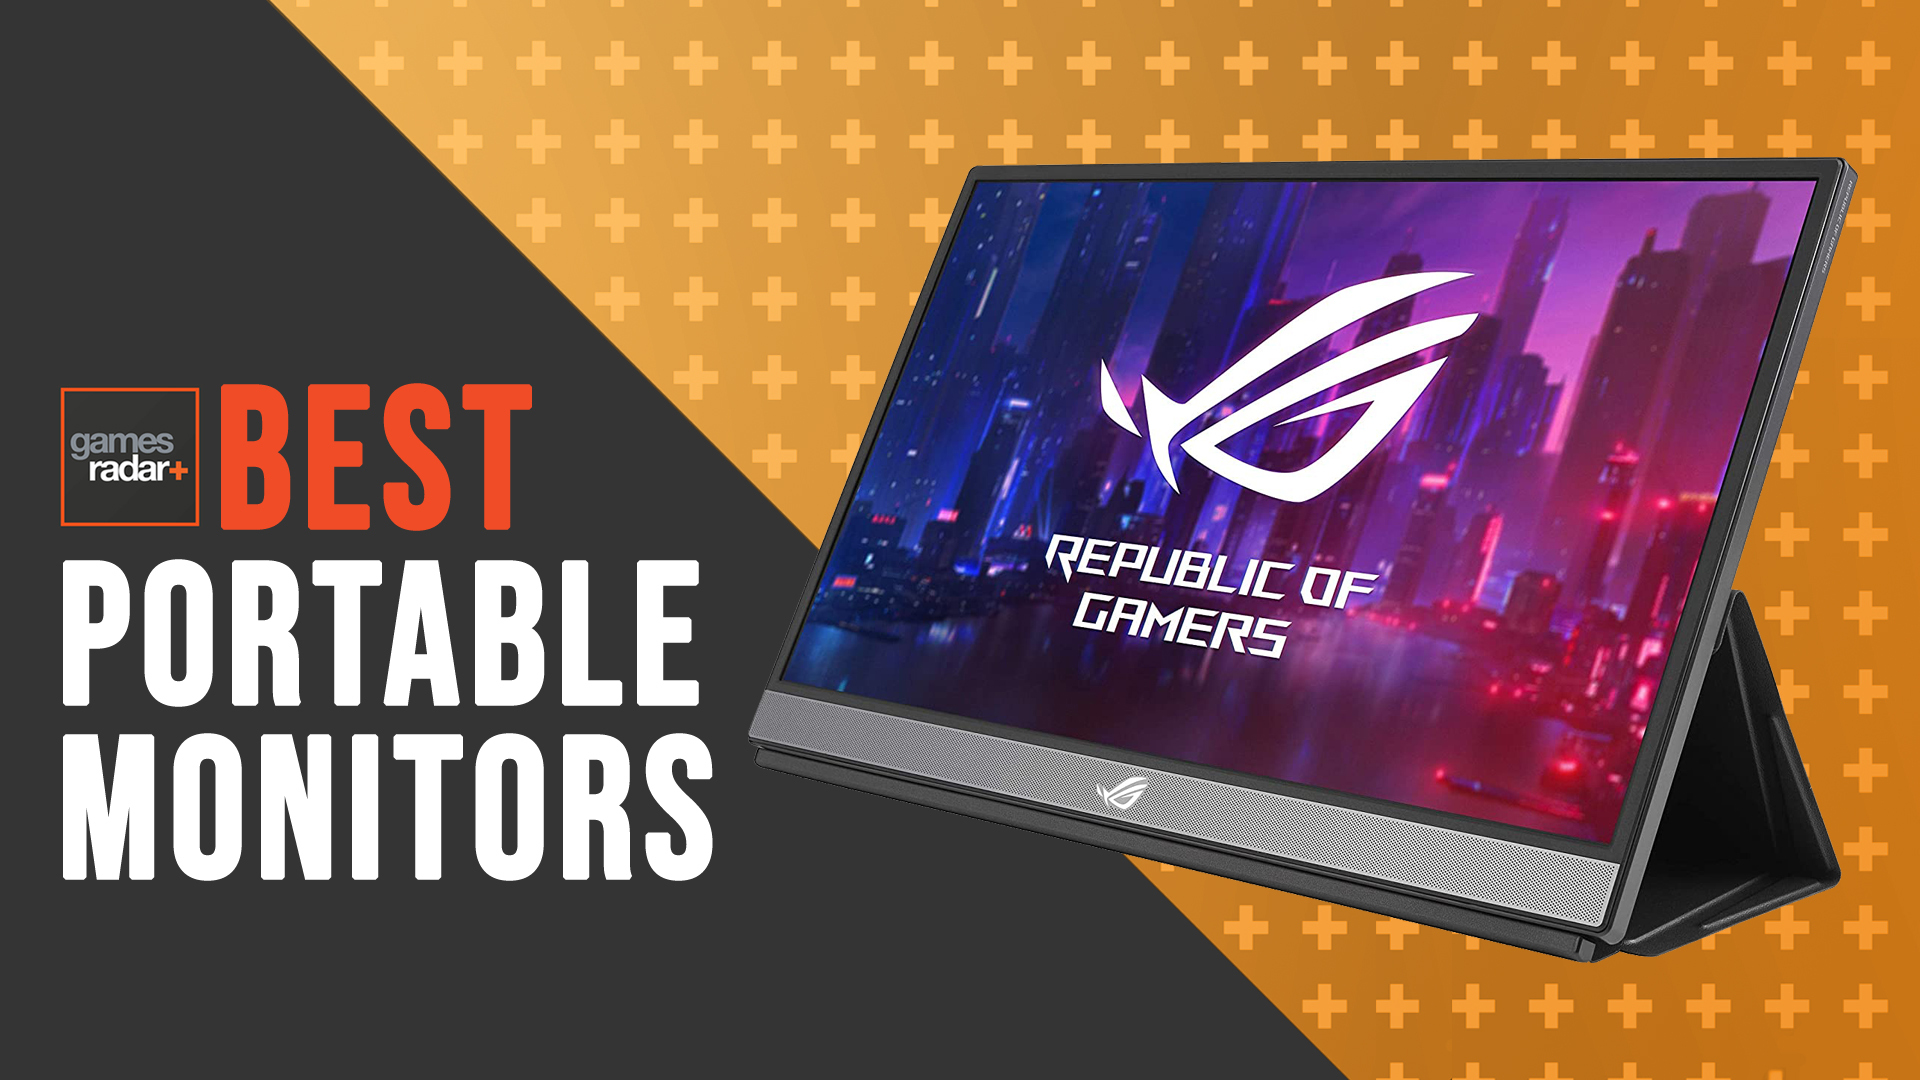 The best portable monitors for gaming, entertainment and work use